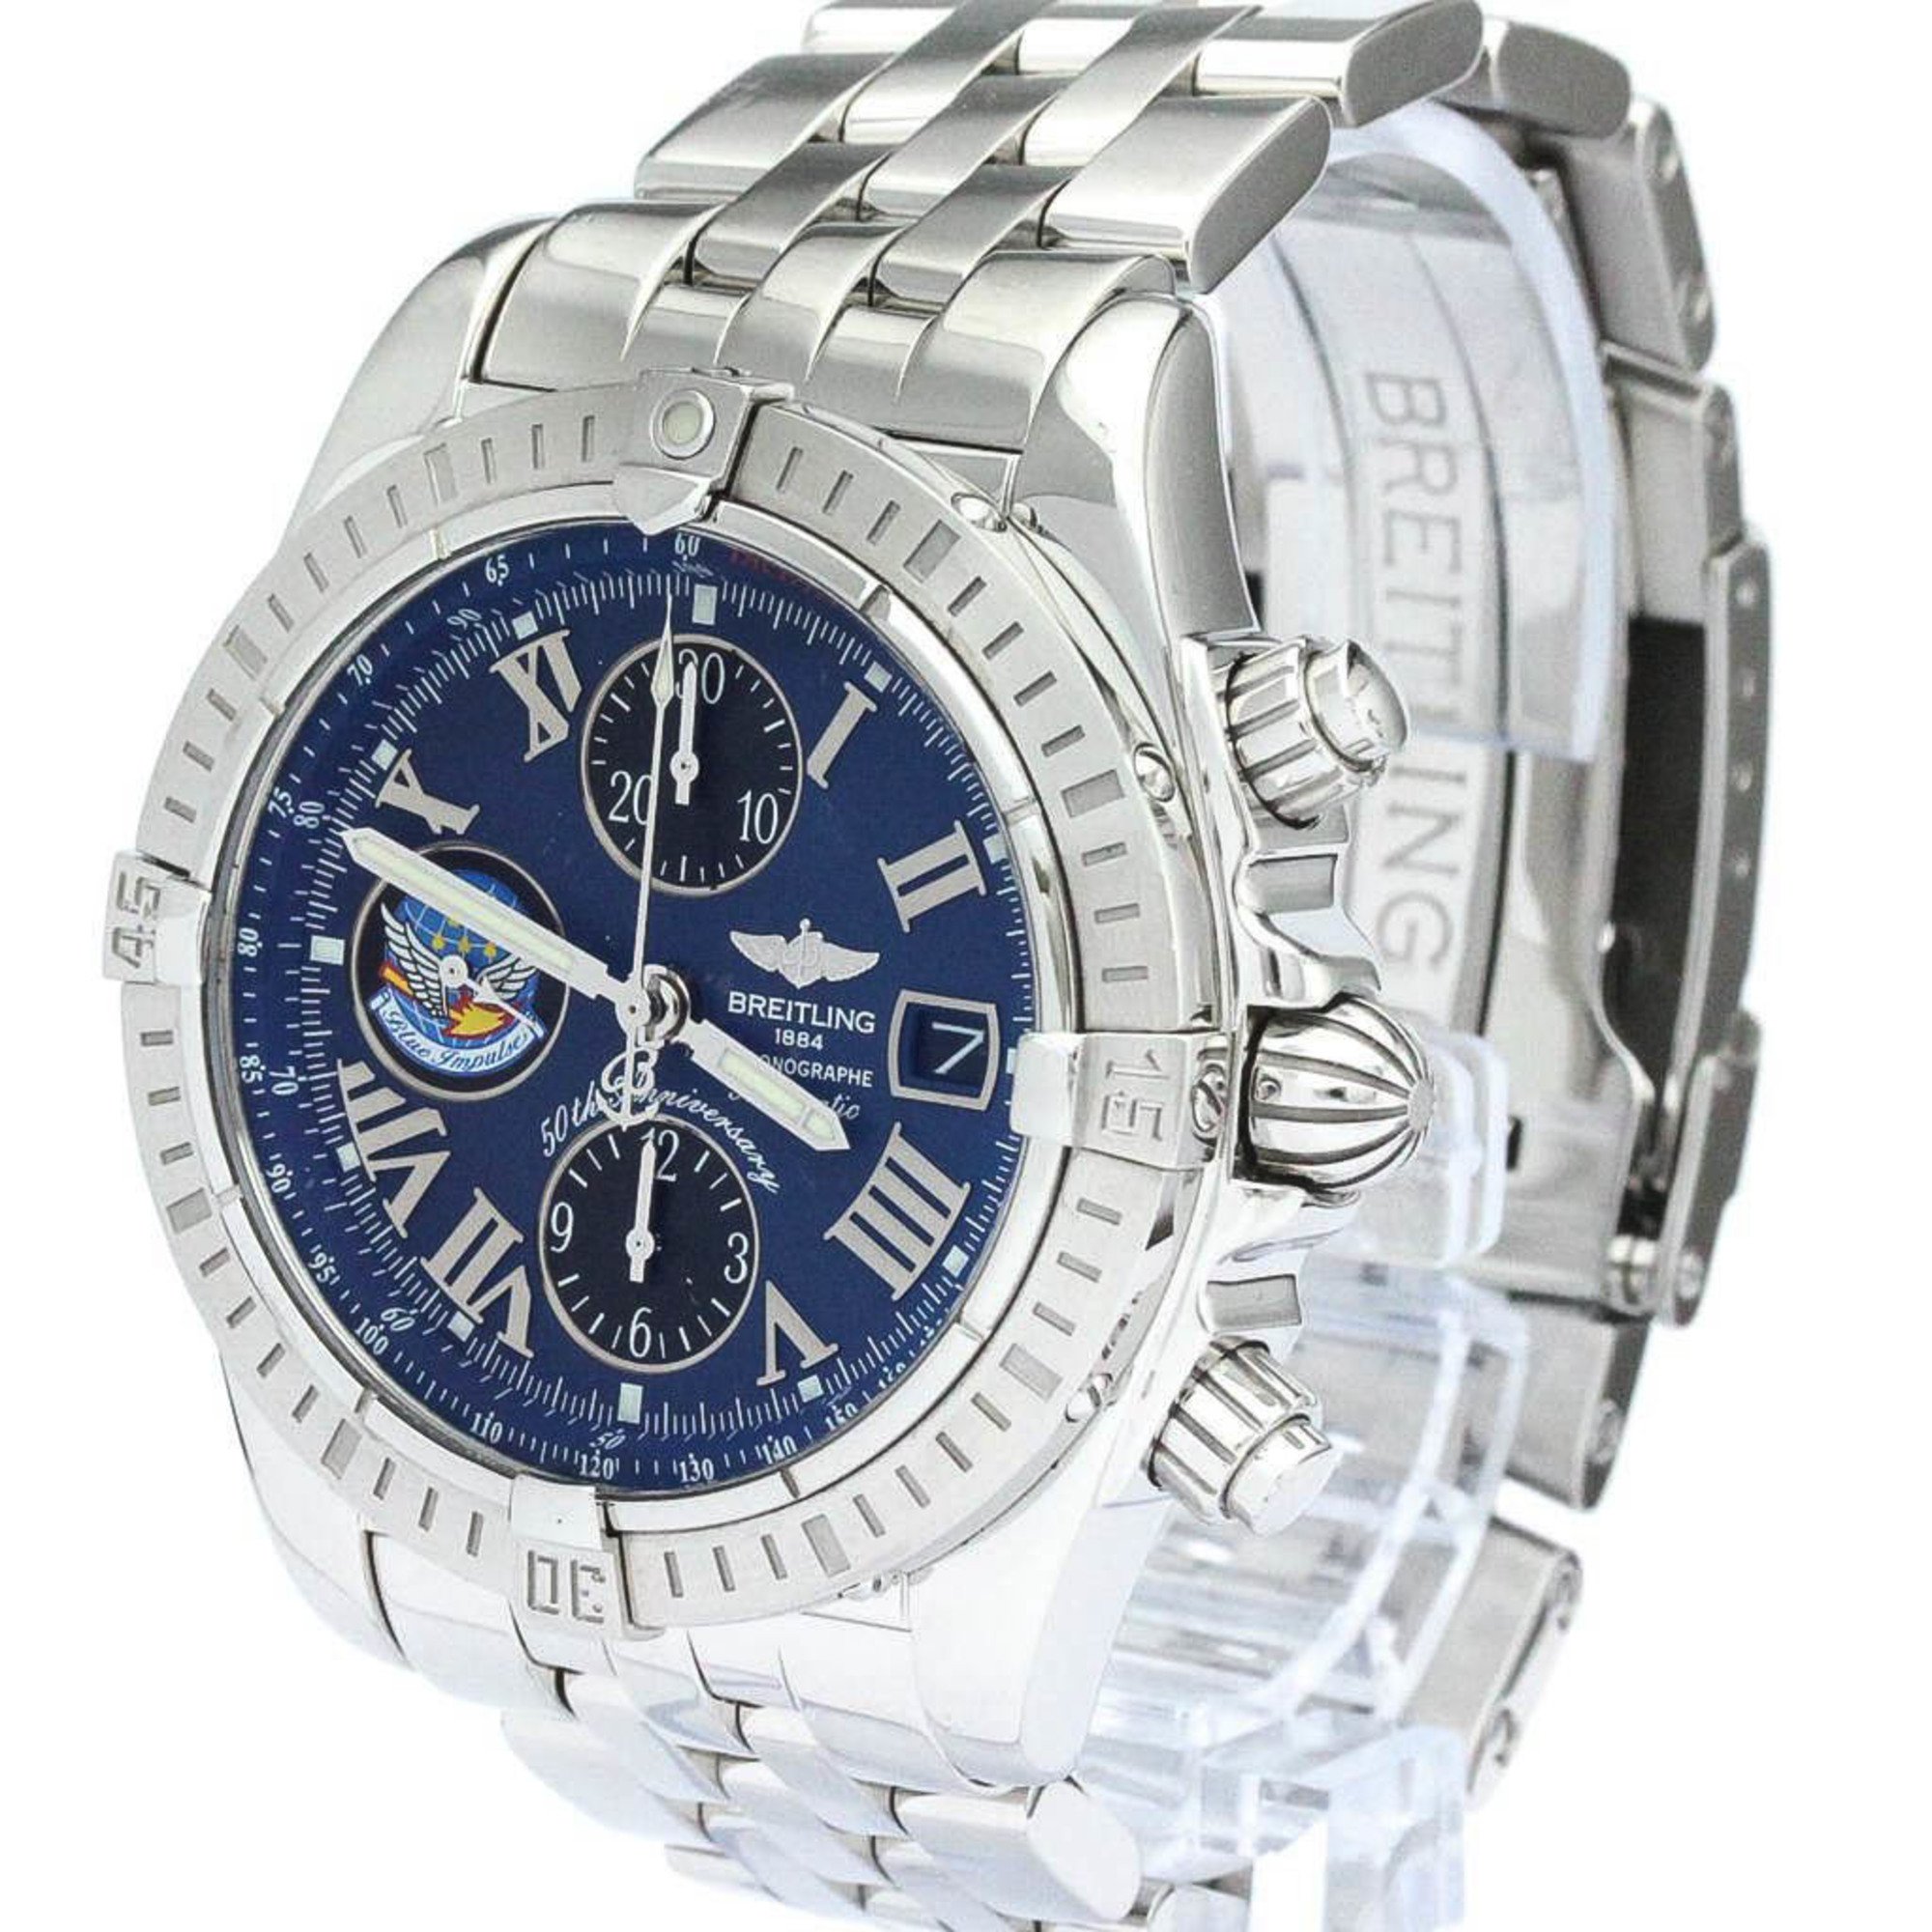 Breitling Chronomat Automatic Stainless Steel Men's Sports Watch A13356